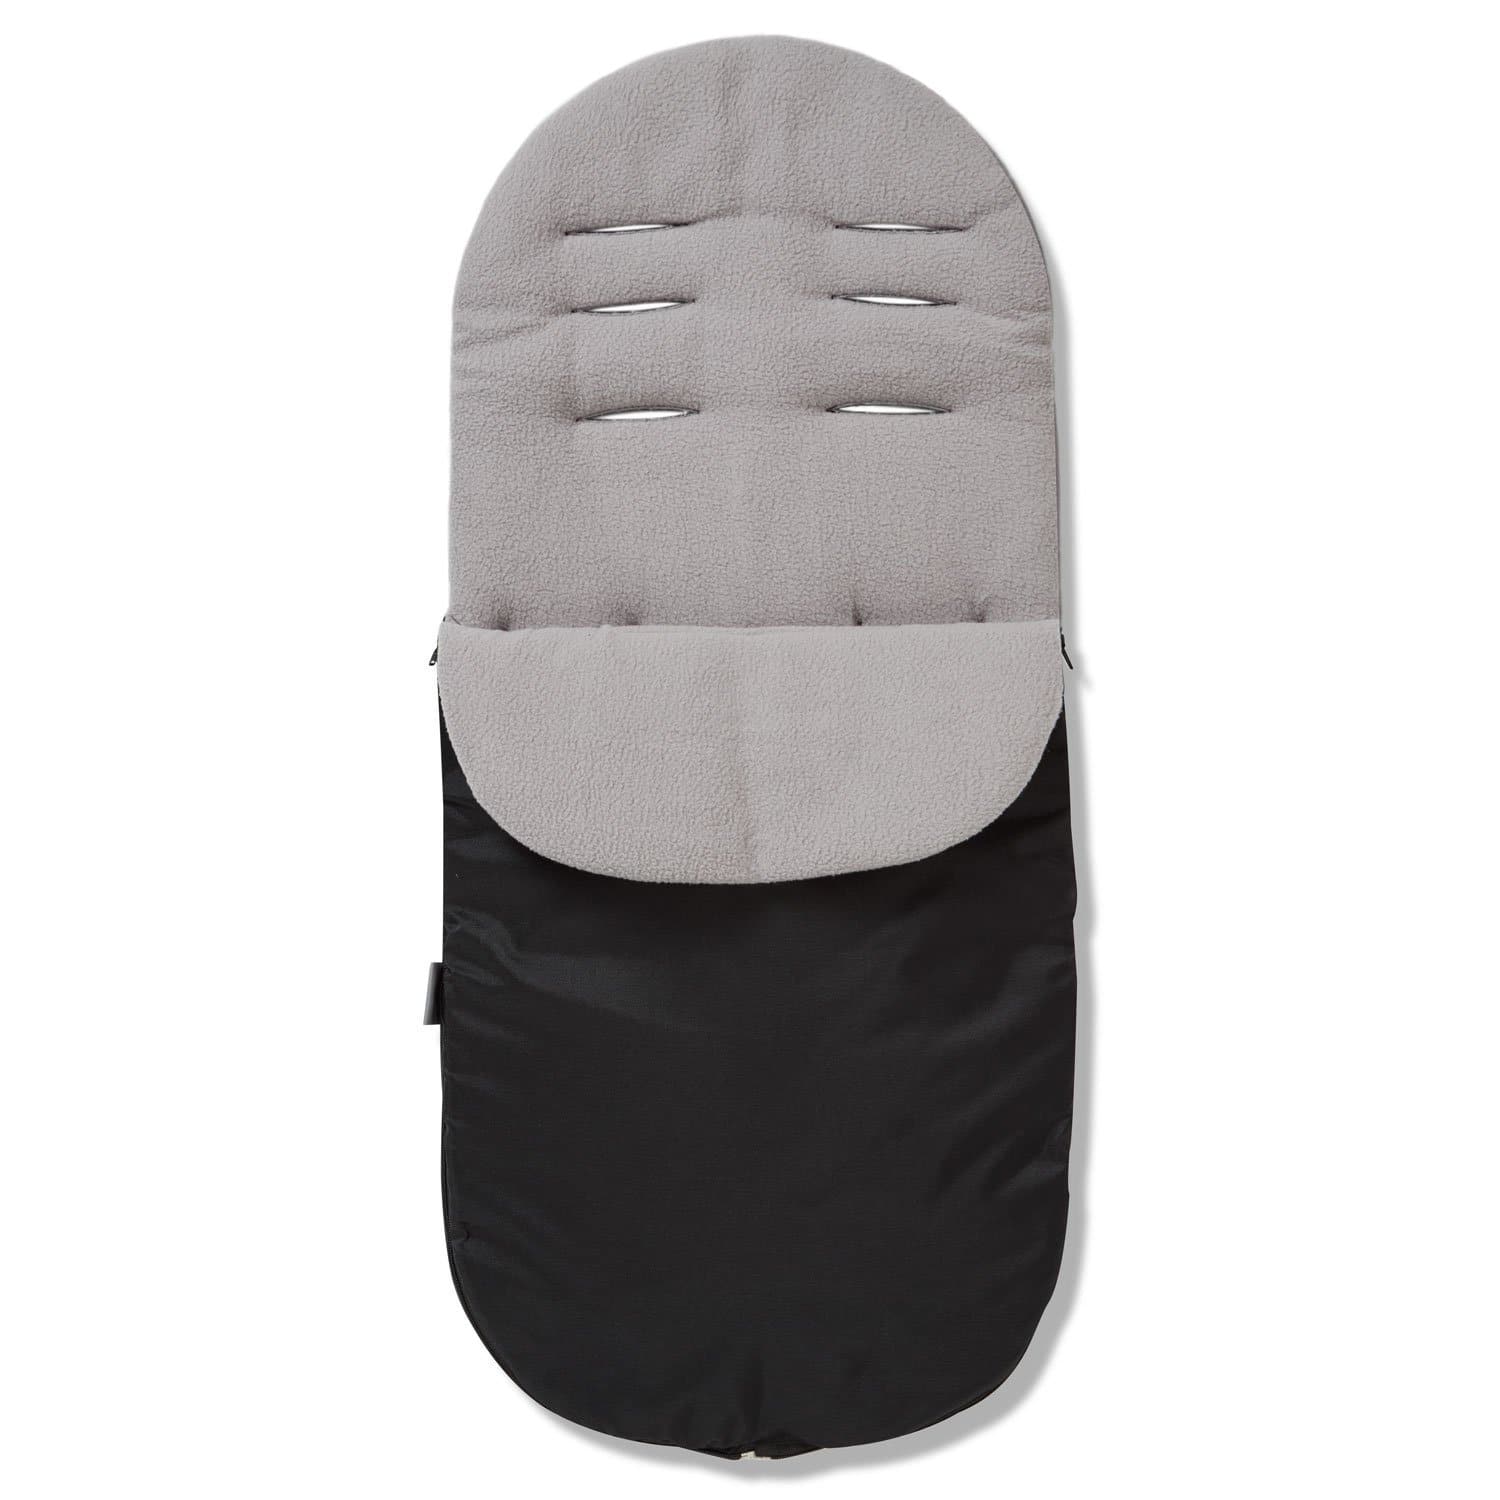 Footmuff / Cosy Toes Compatible with Hesba - Grey / Fits All Models | For Your Little One